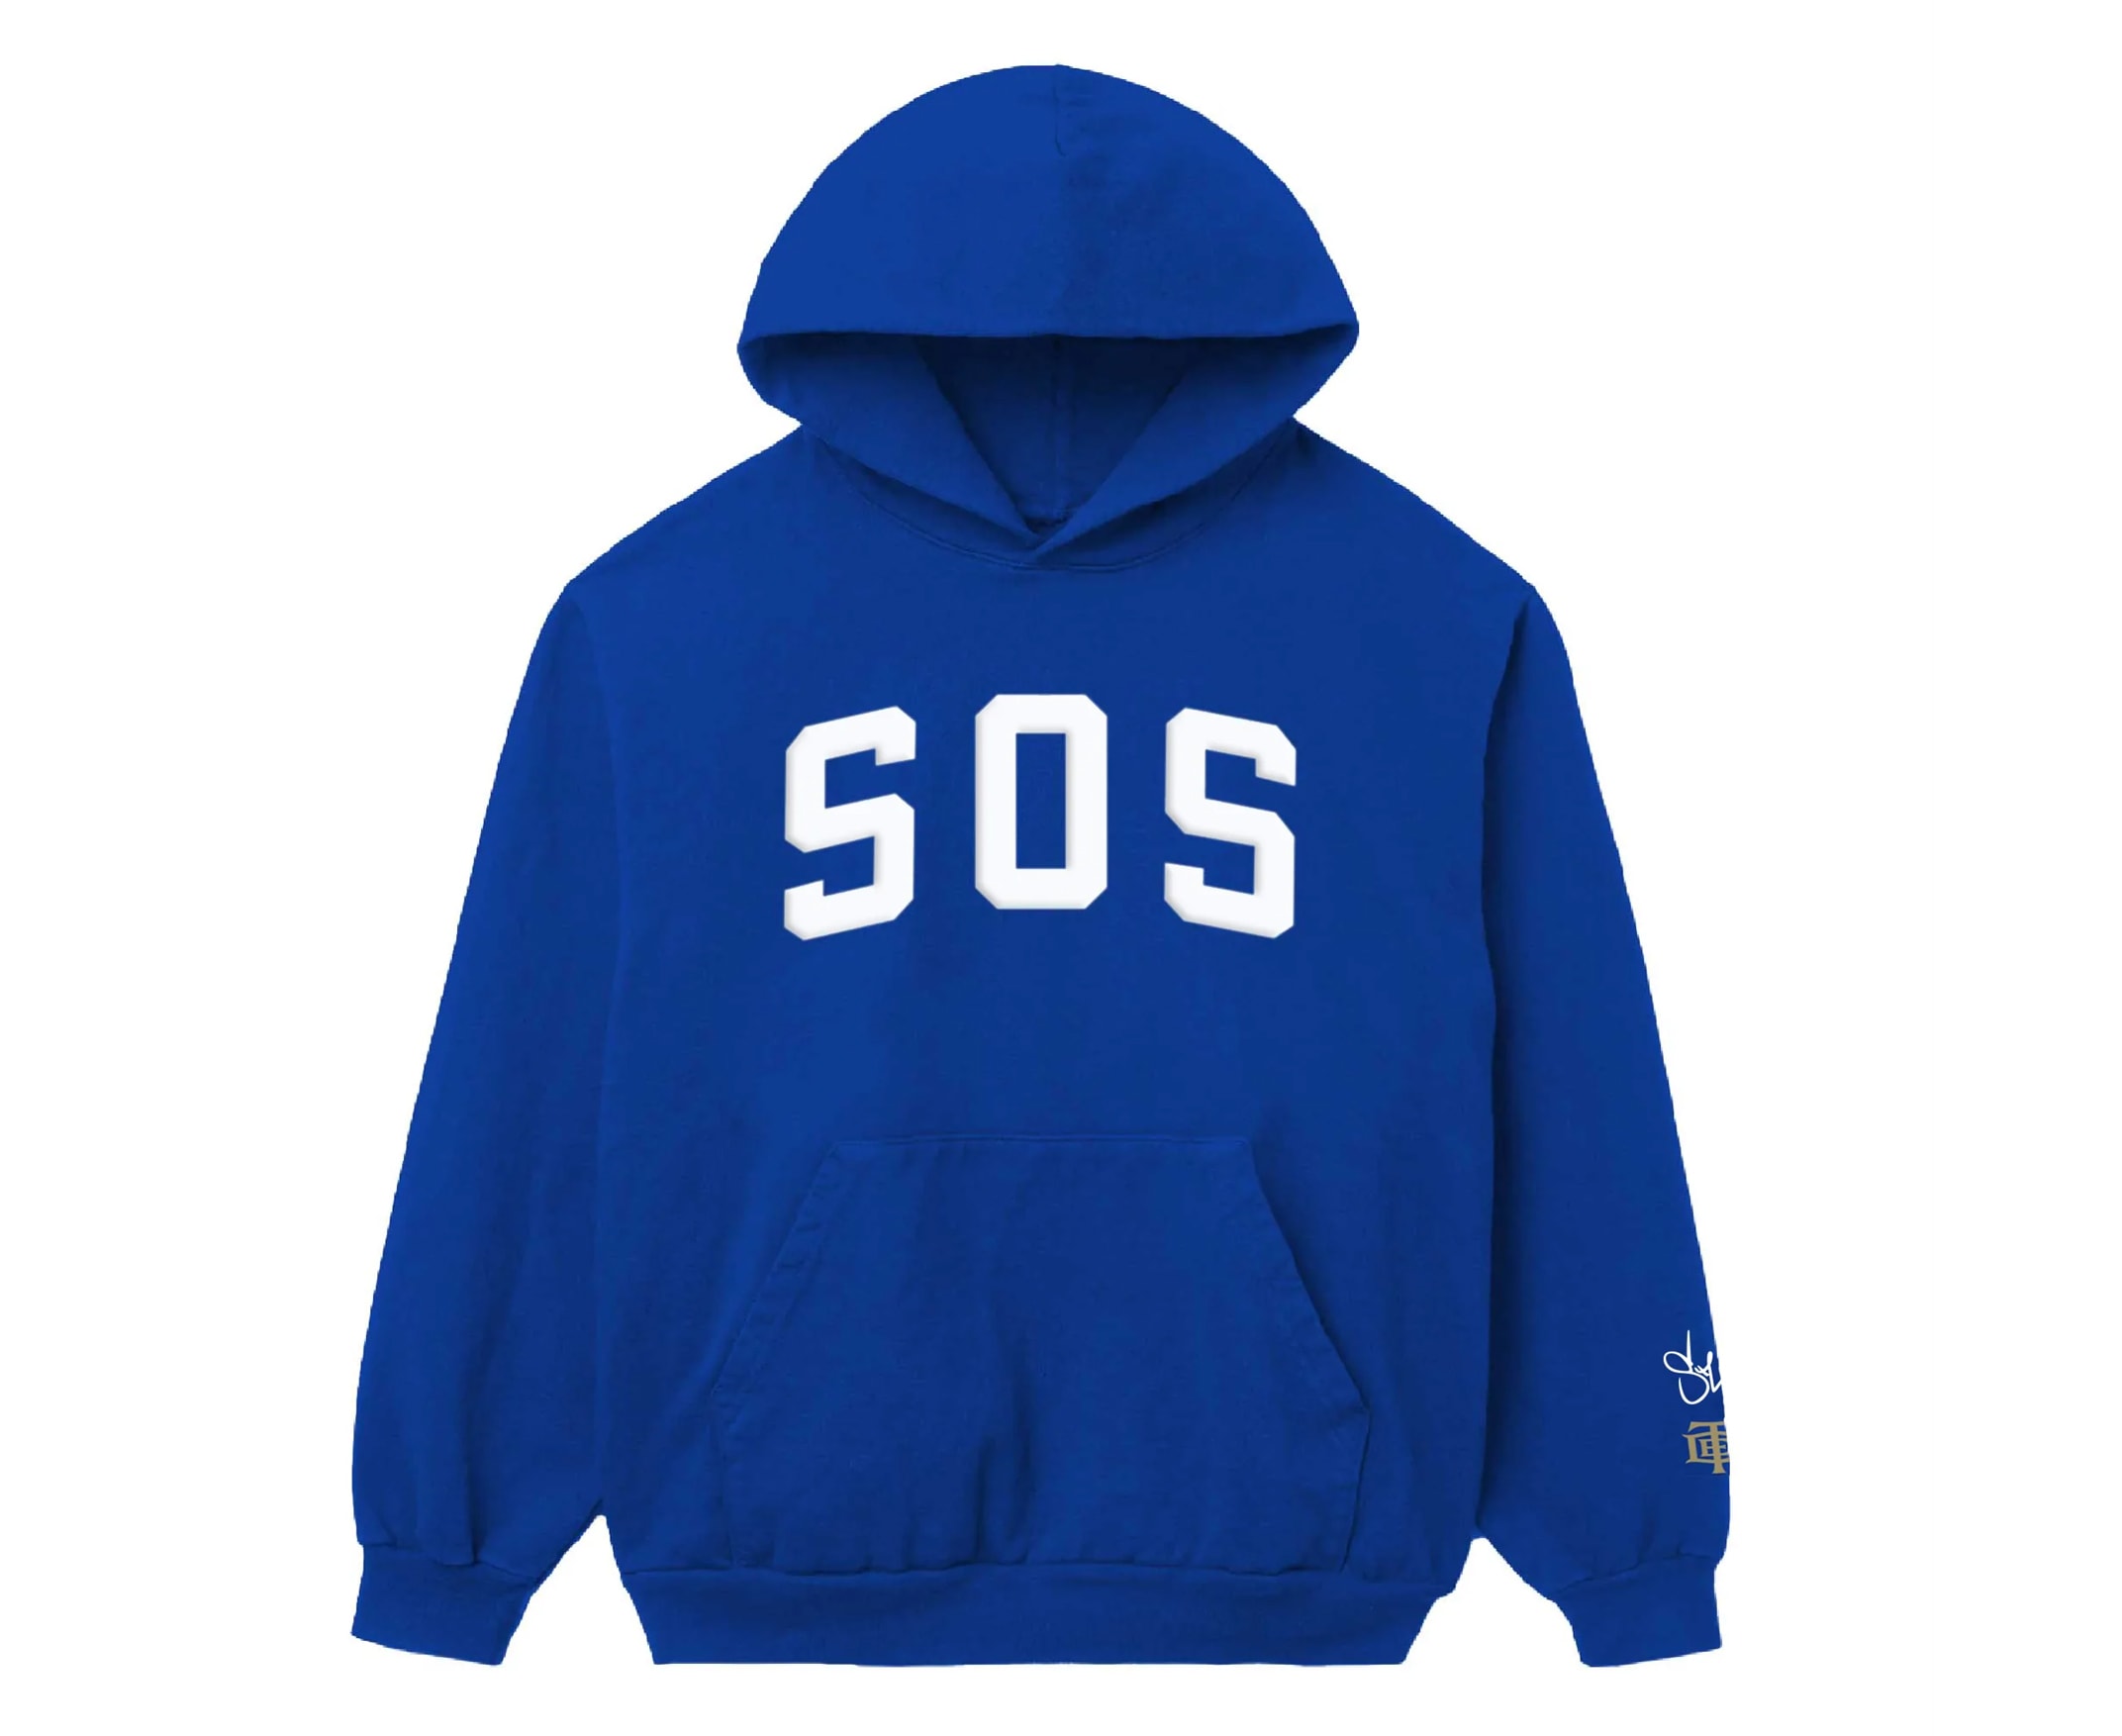 A product photo of SZA&#x27;s merch in support of her new album &#x27;SOS.&#x27;